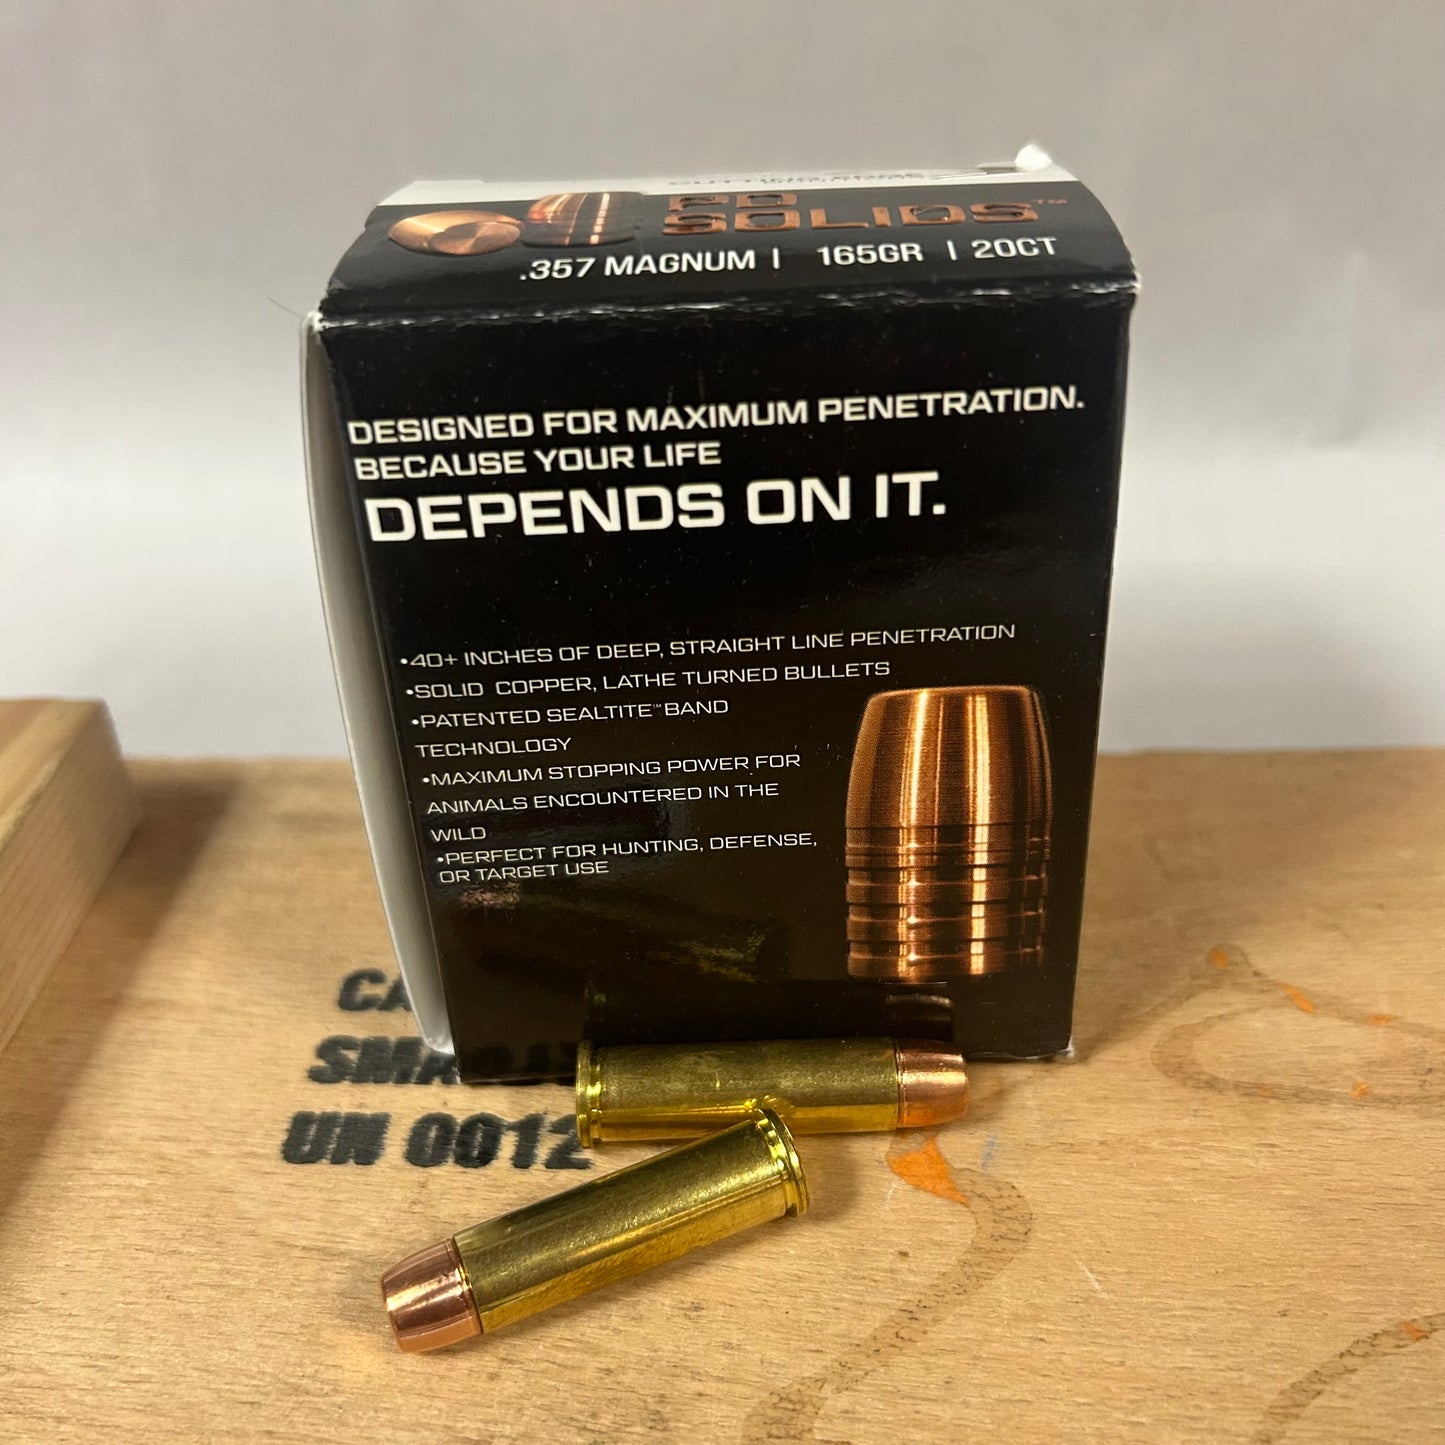 20 Count Box Cutting Edge PD Solids .357 Magnum 165 gr. - PD357